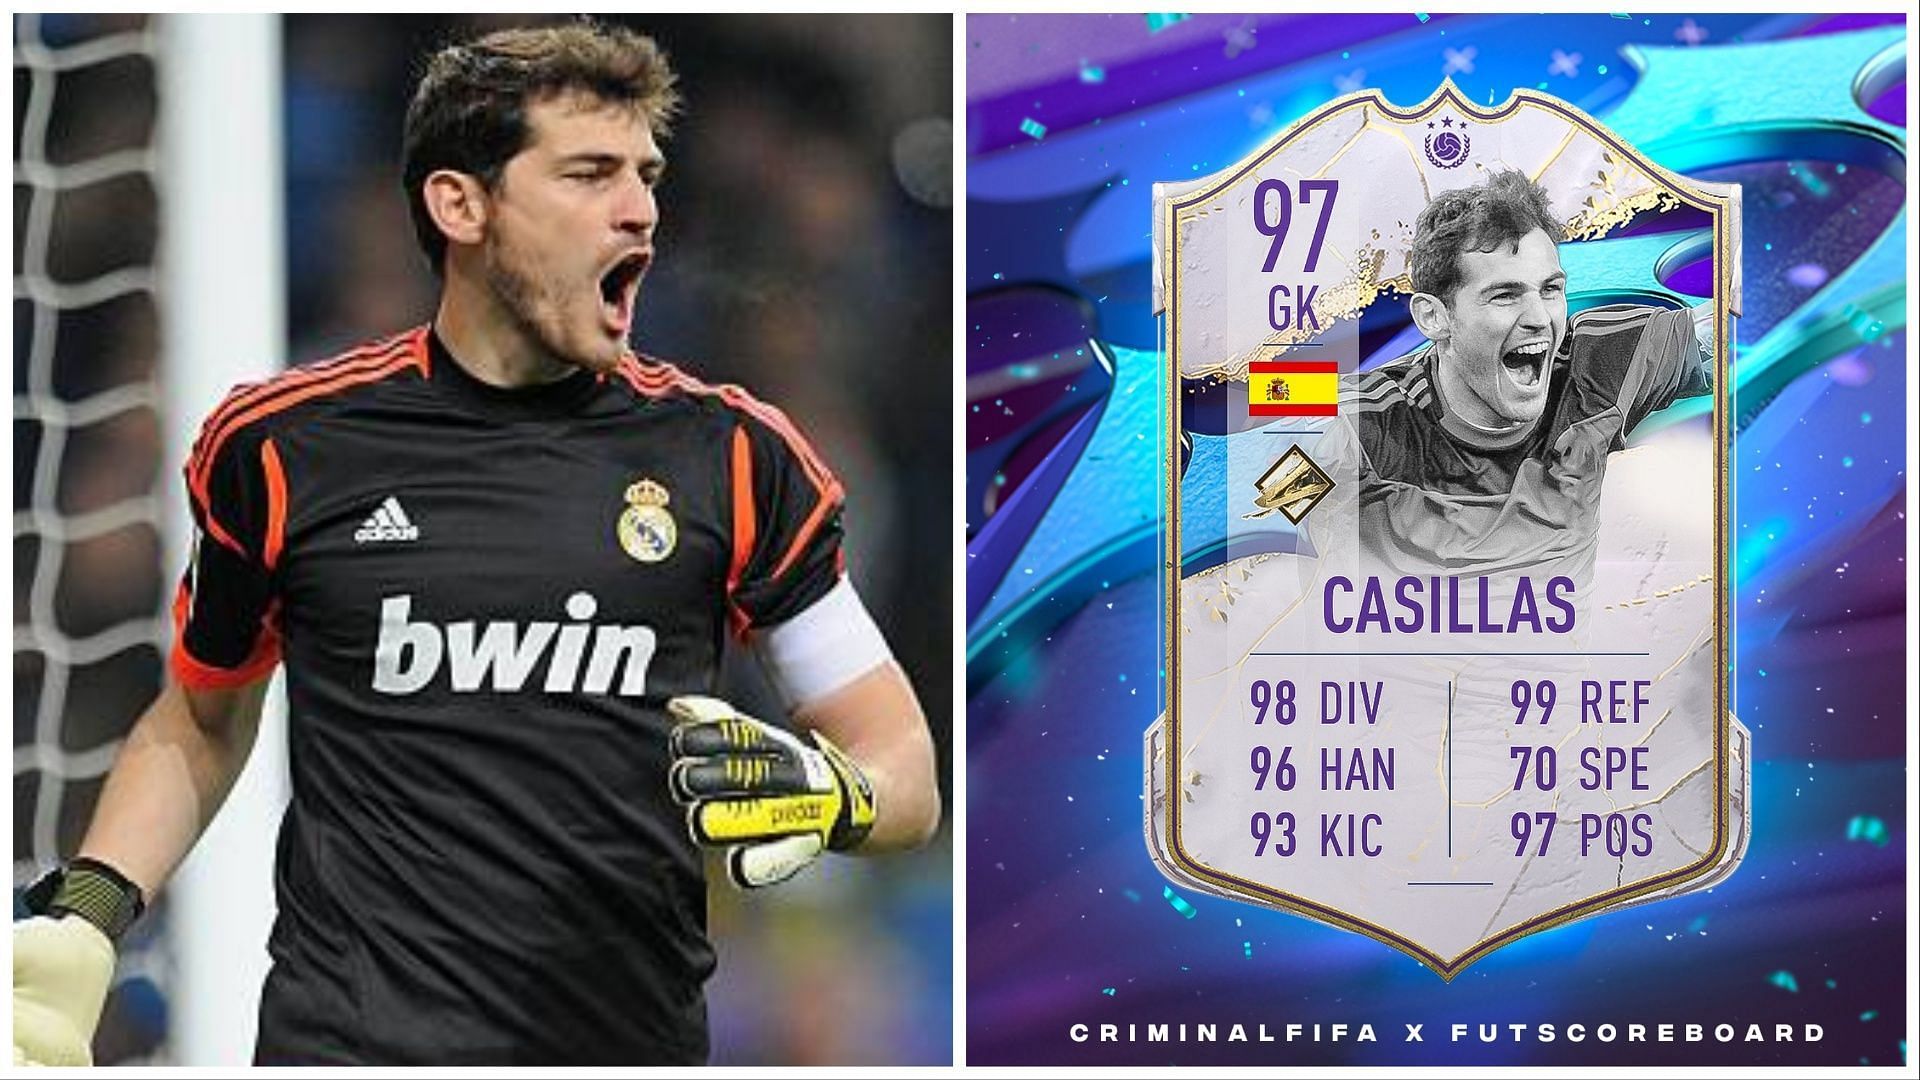 Cover Star Casillas has been leaked (Images via Getty and Twitter/Criminal__x)